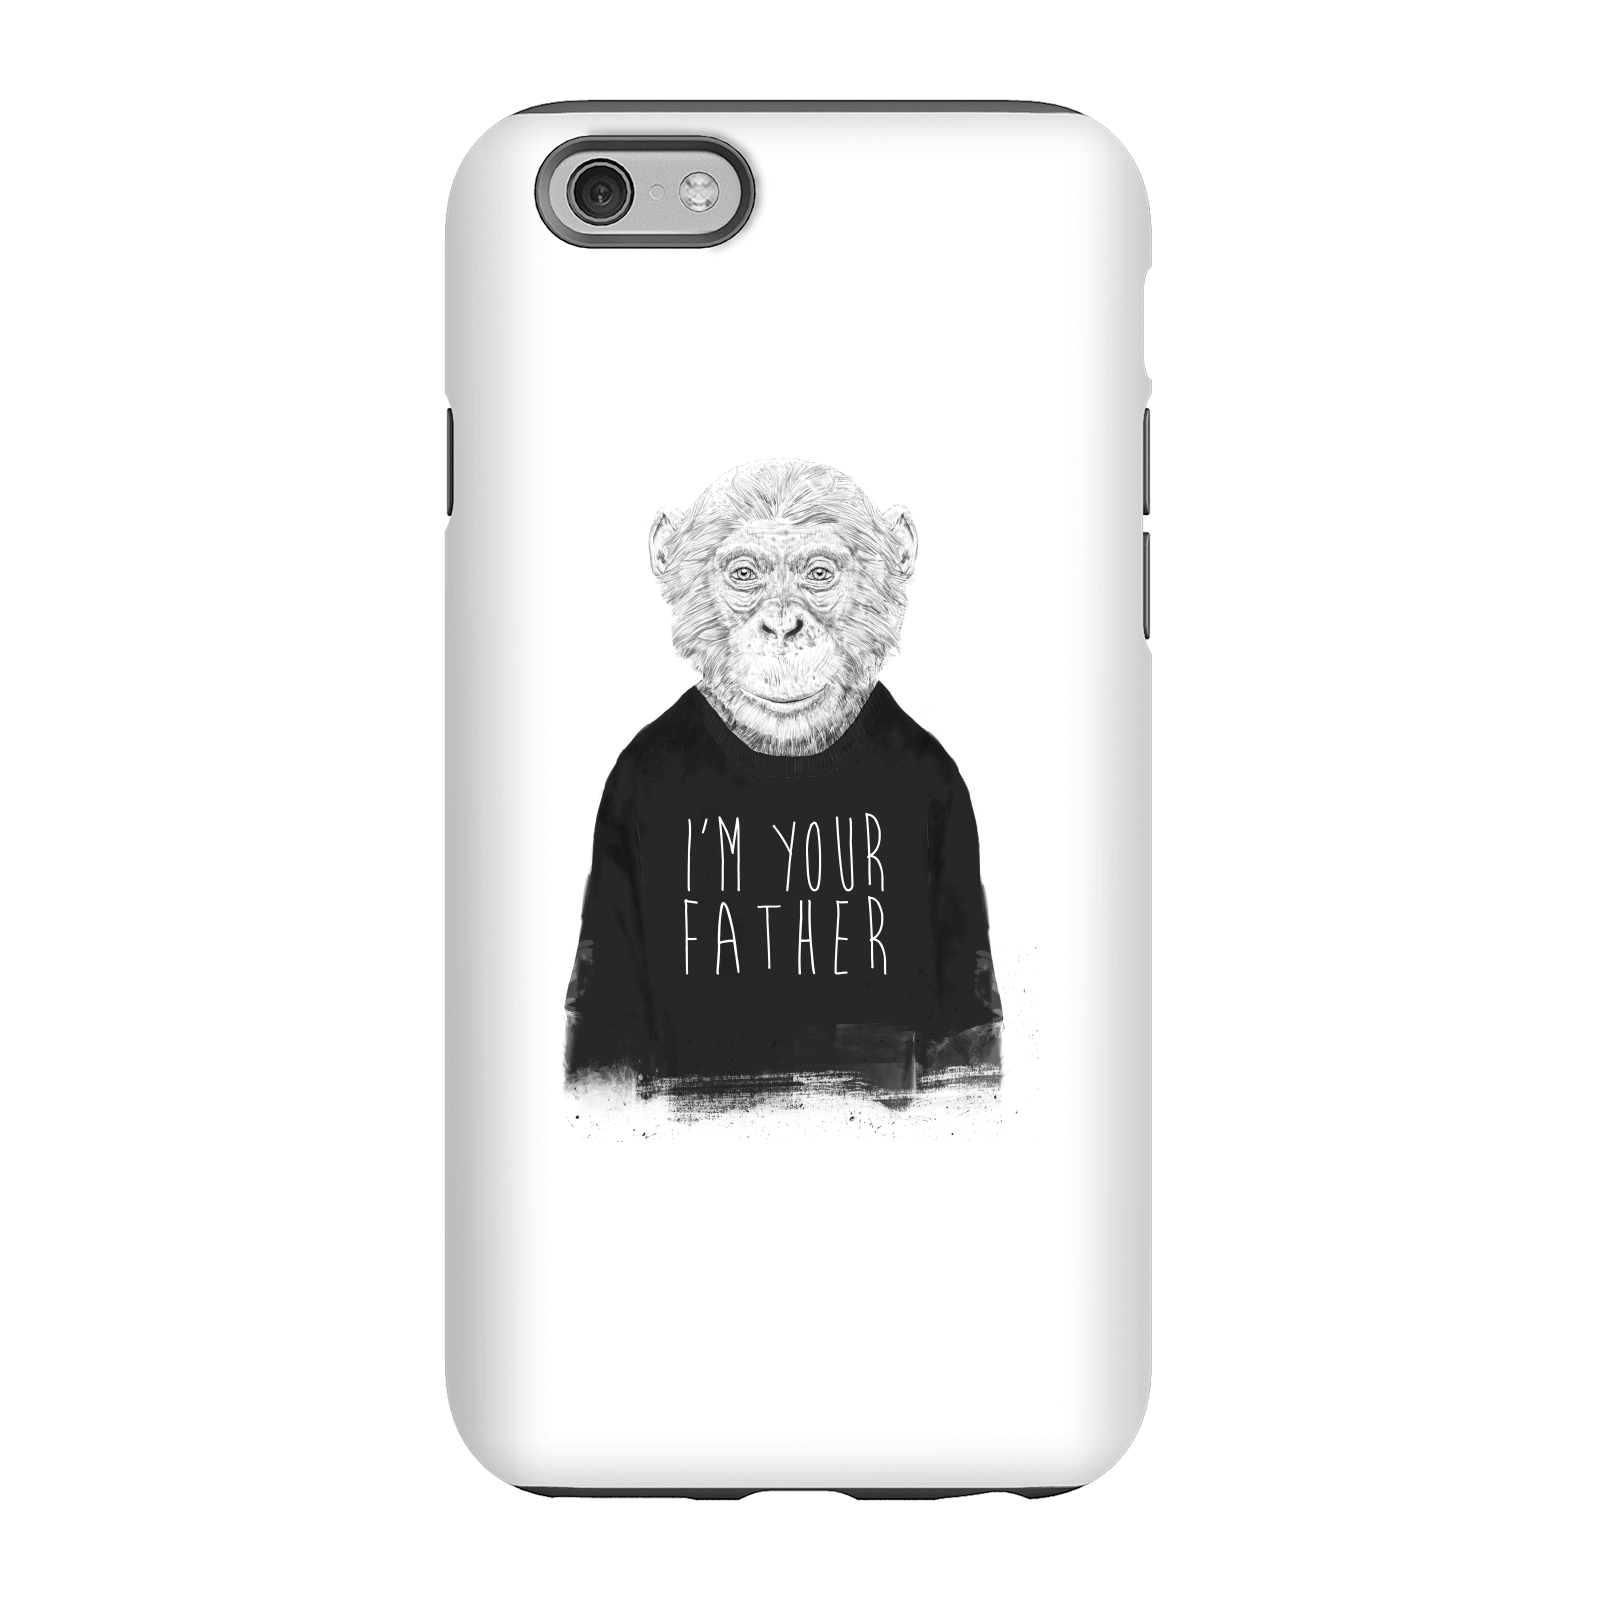 Balazs Solti I'm Your Father Phone Case for iPhone and Android - iPhone 6S - Tough Case - Gloss